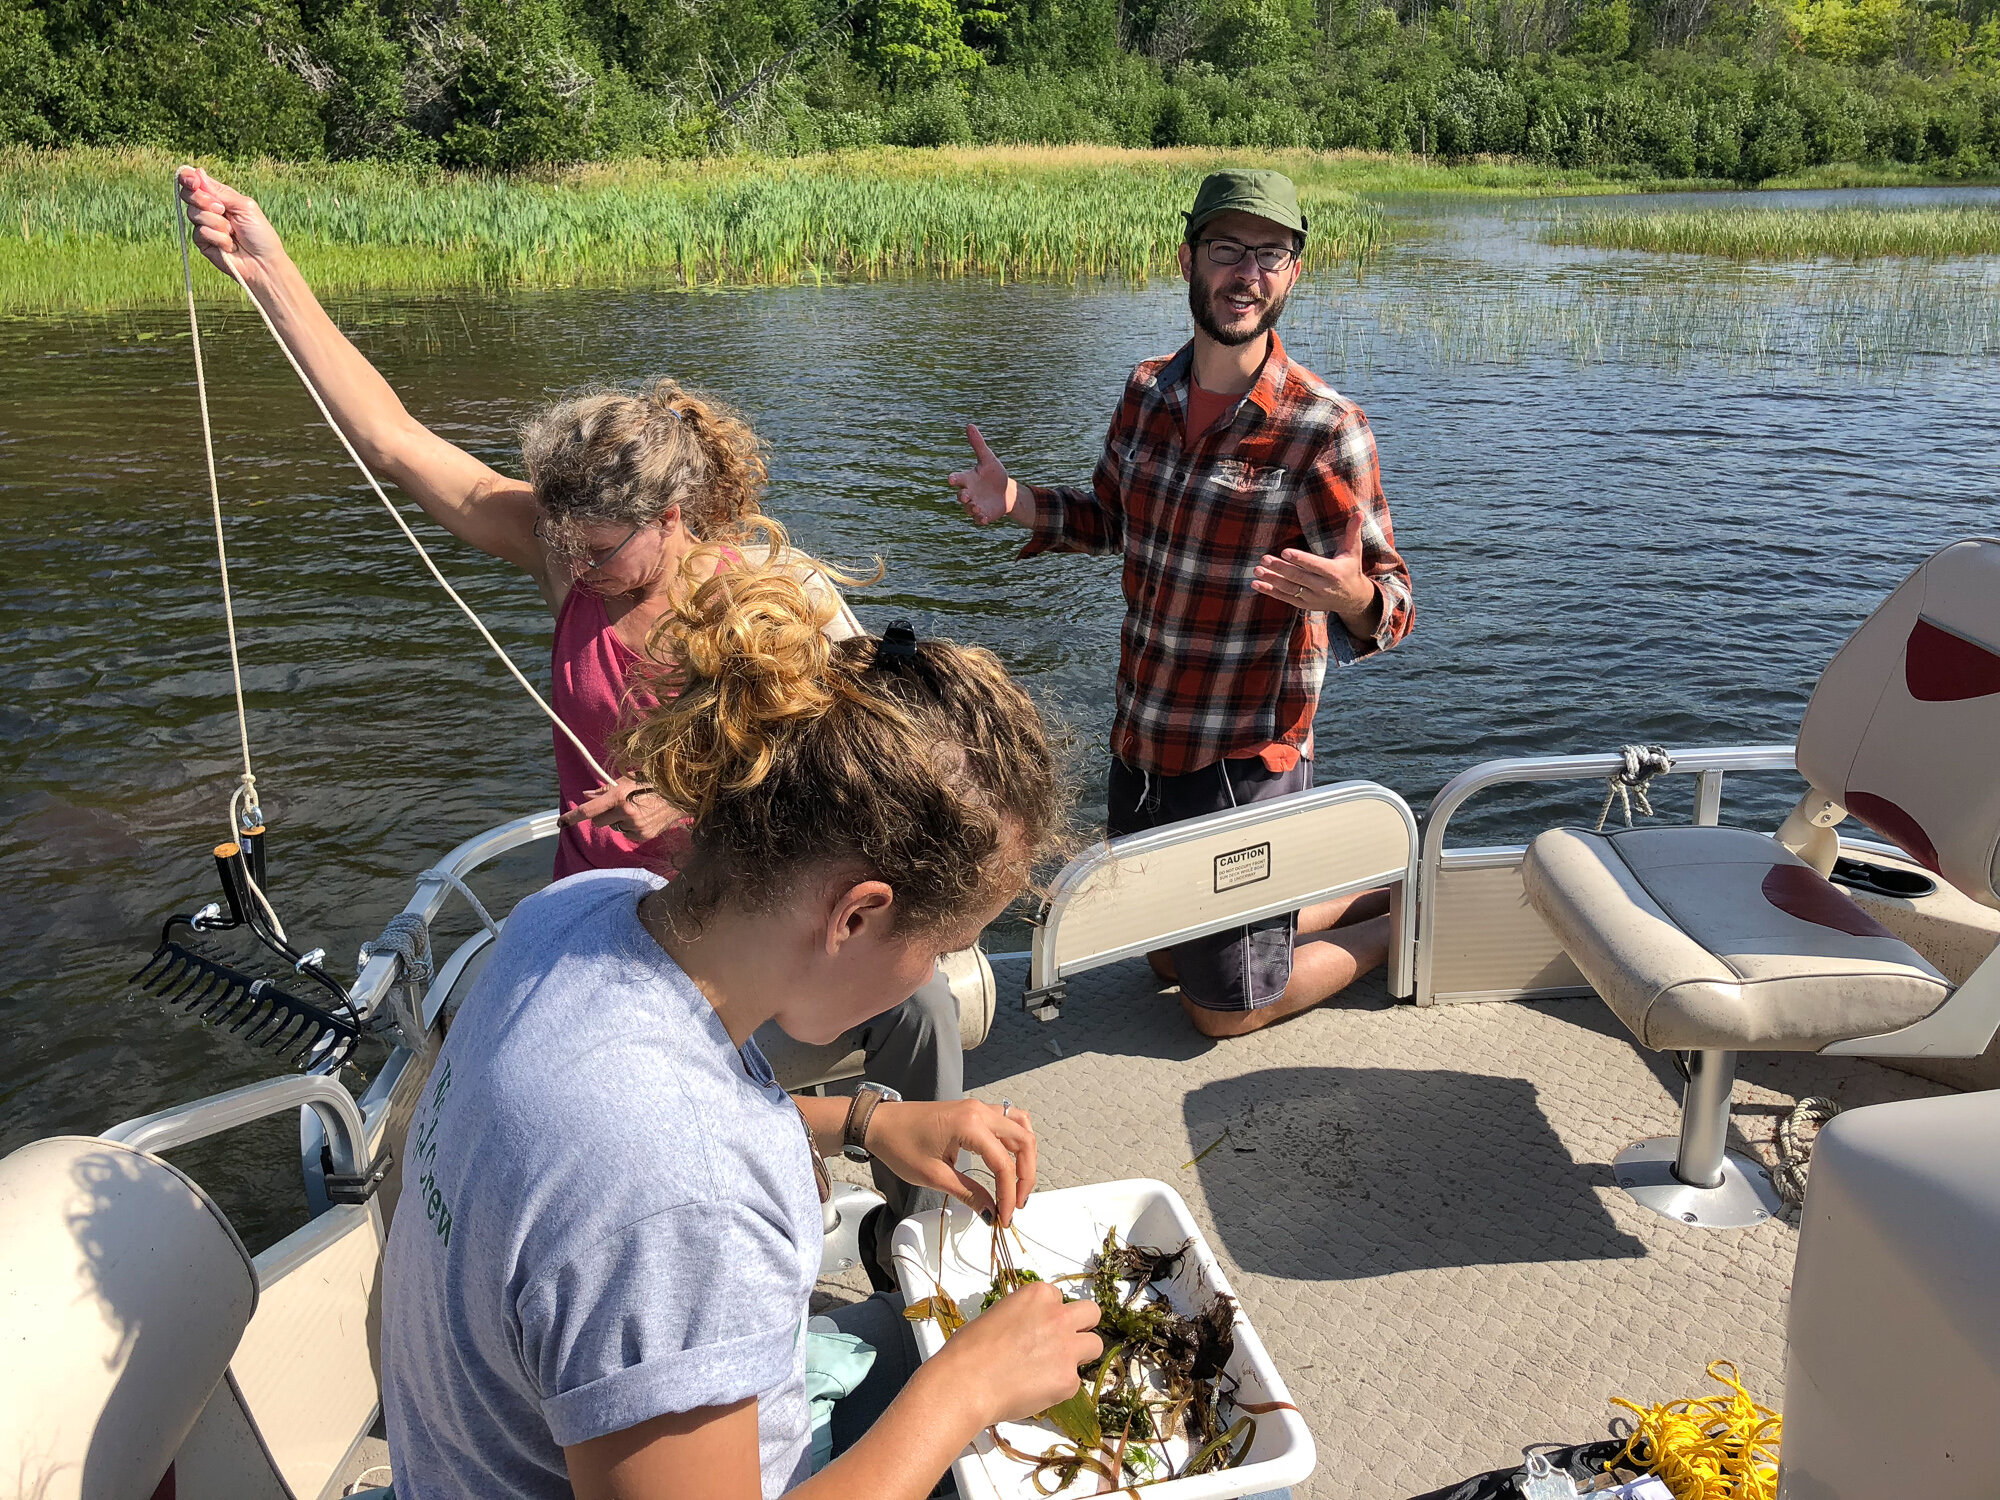   In 2018, Erick Elgin an MSU Extension limnologist came to Gratiot Lake to offer a free workshop on identification of aquatic invasive plants and training in protocol for monitoring for detection on inland lakes. This was part of GLC’s participation